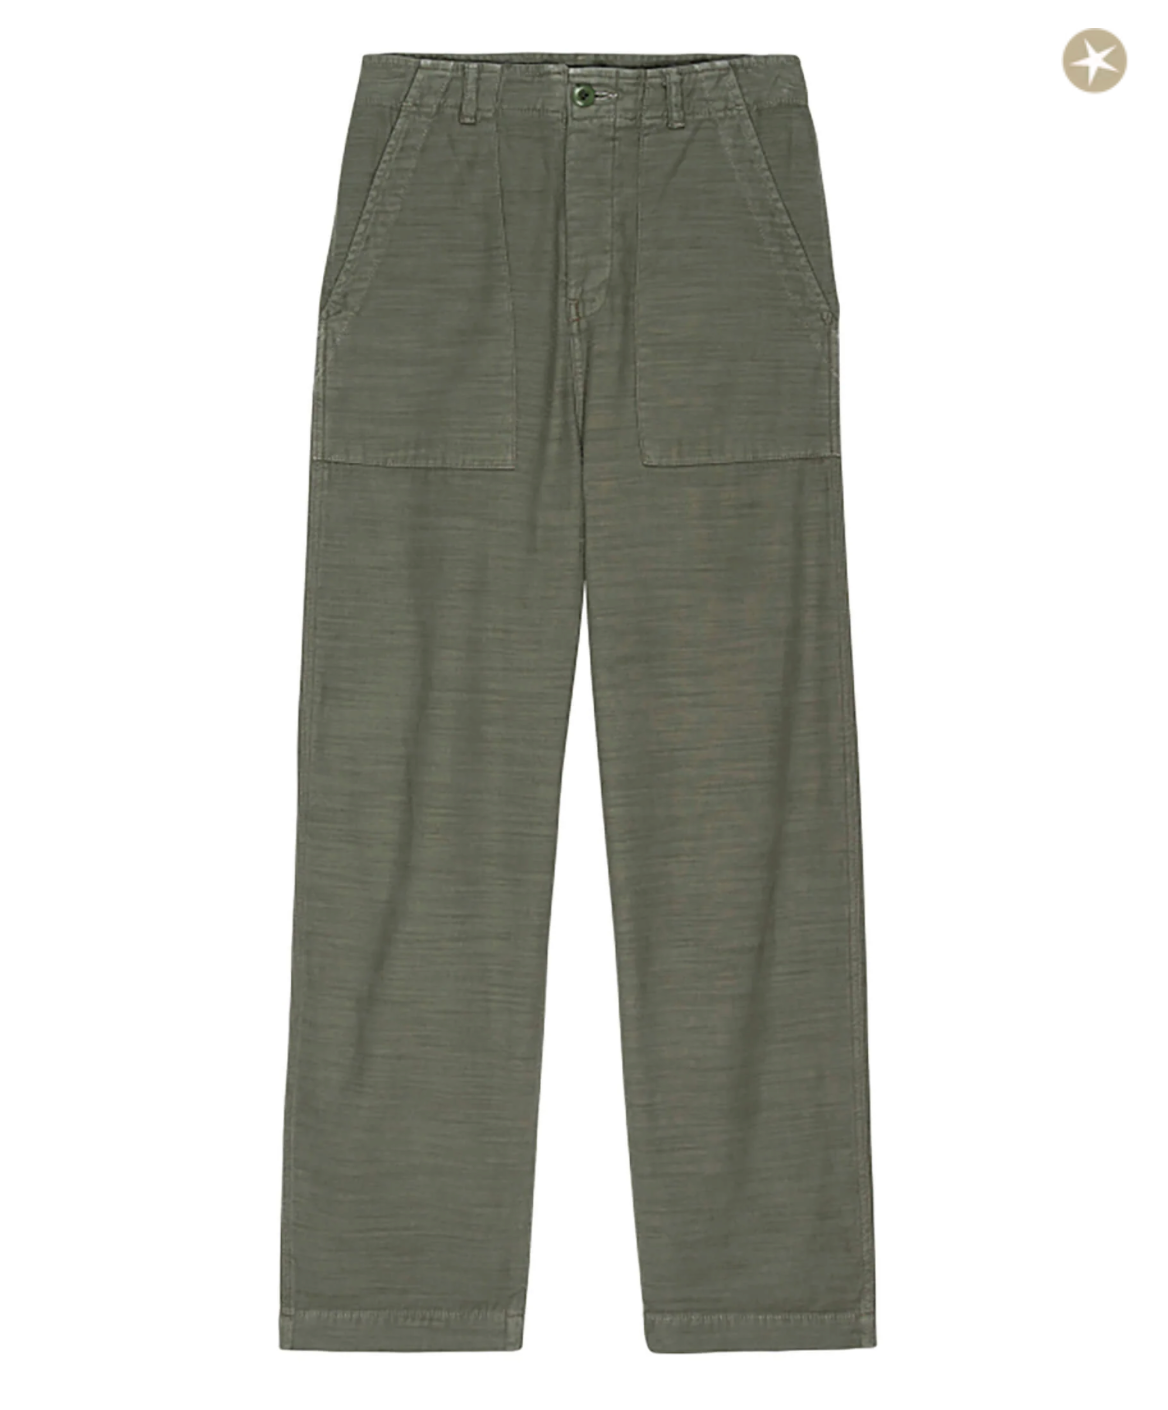 The Admiral Pant. Army